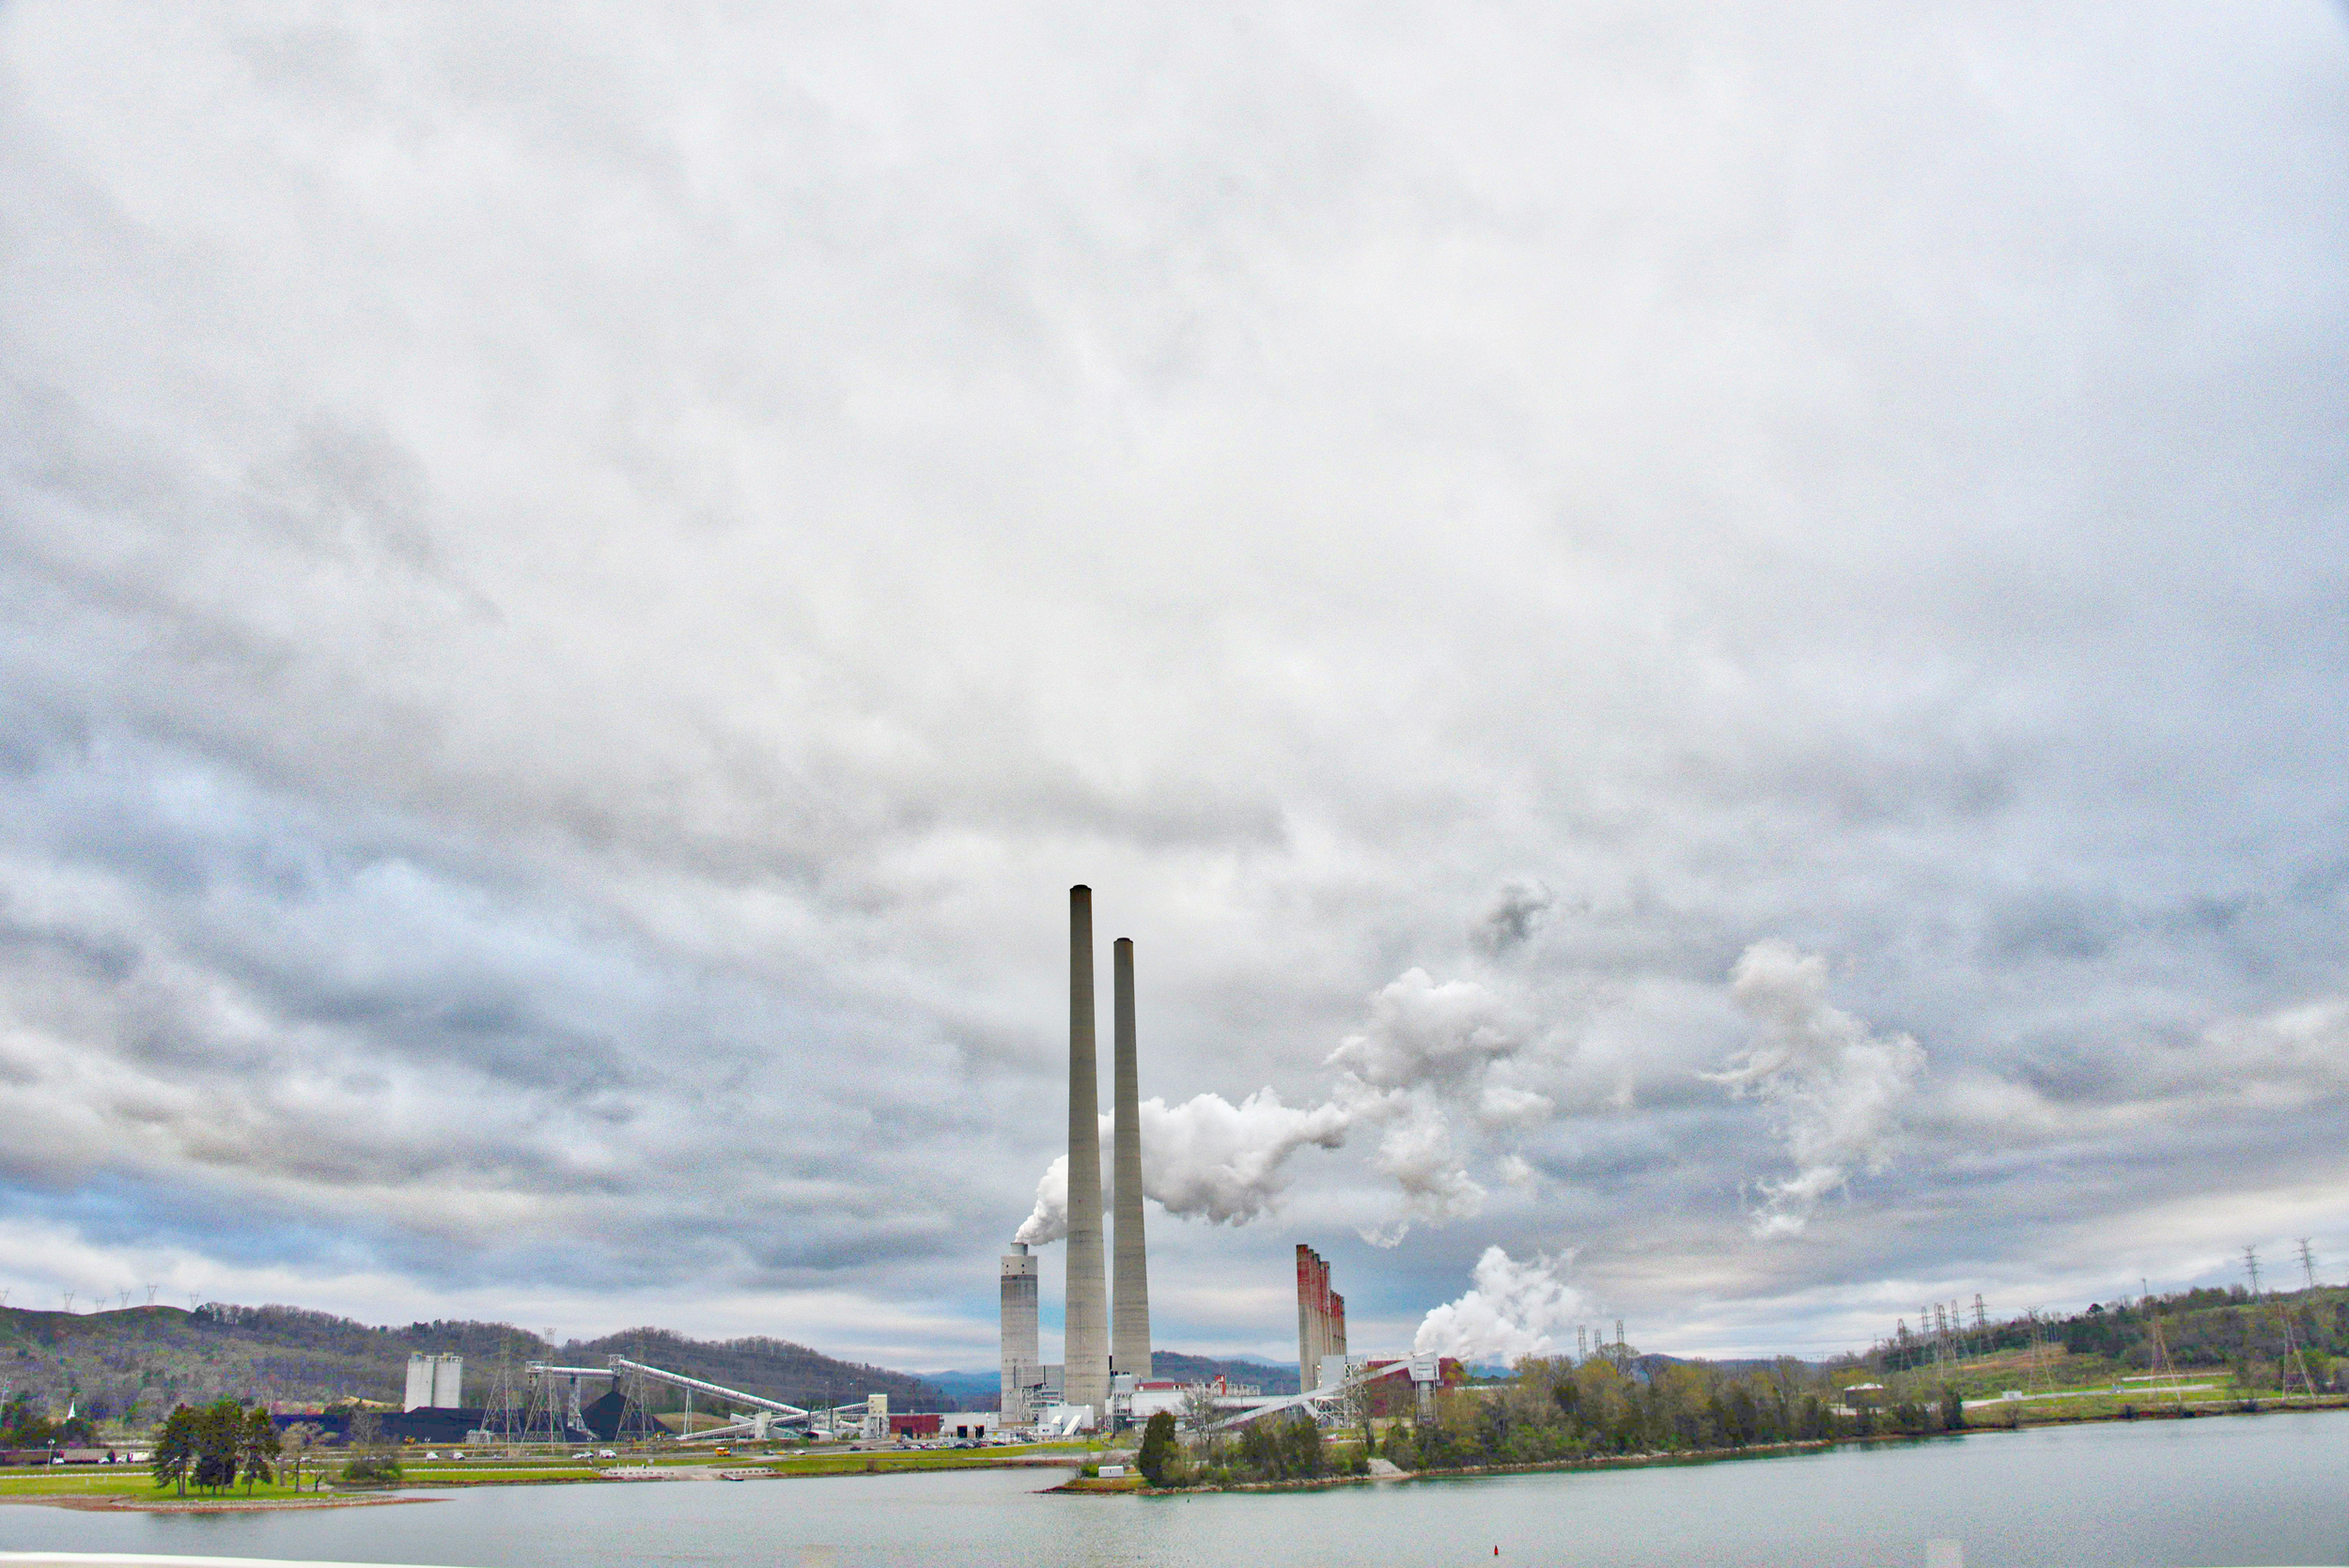 PHOTO: Kingston Fossil Plant, commonly known as Kingston Steam Plant,  a 1.4-gigawatt coal-fired power plant located in Roane County, just outside Kingston, Tenn., is pictured on March 31, 2019.